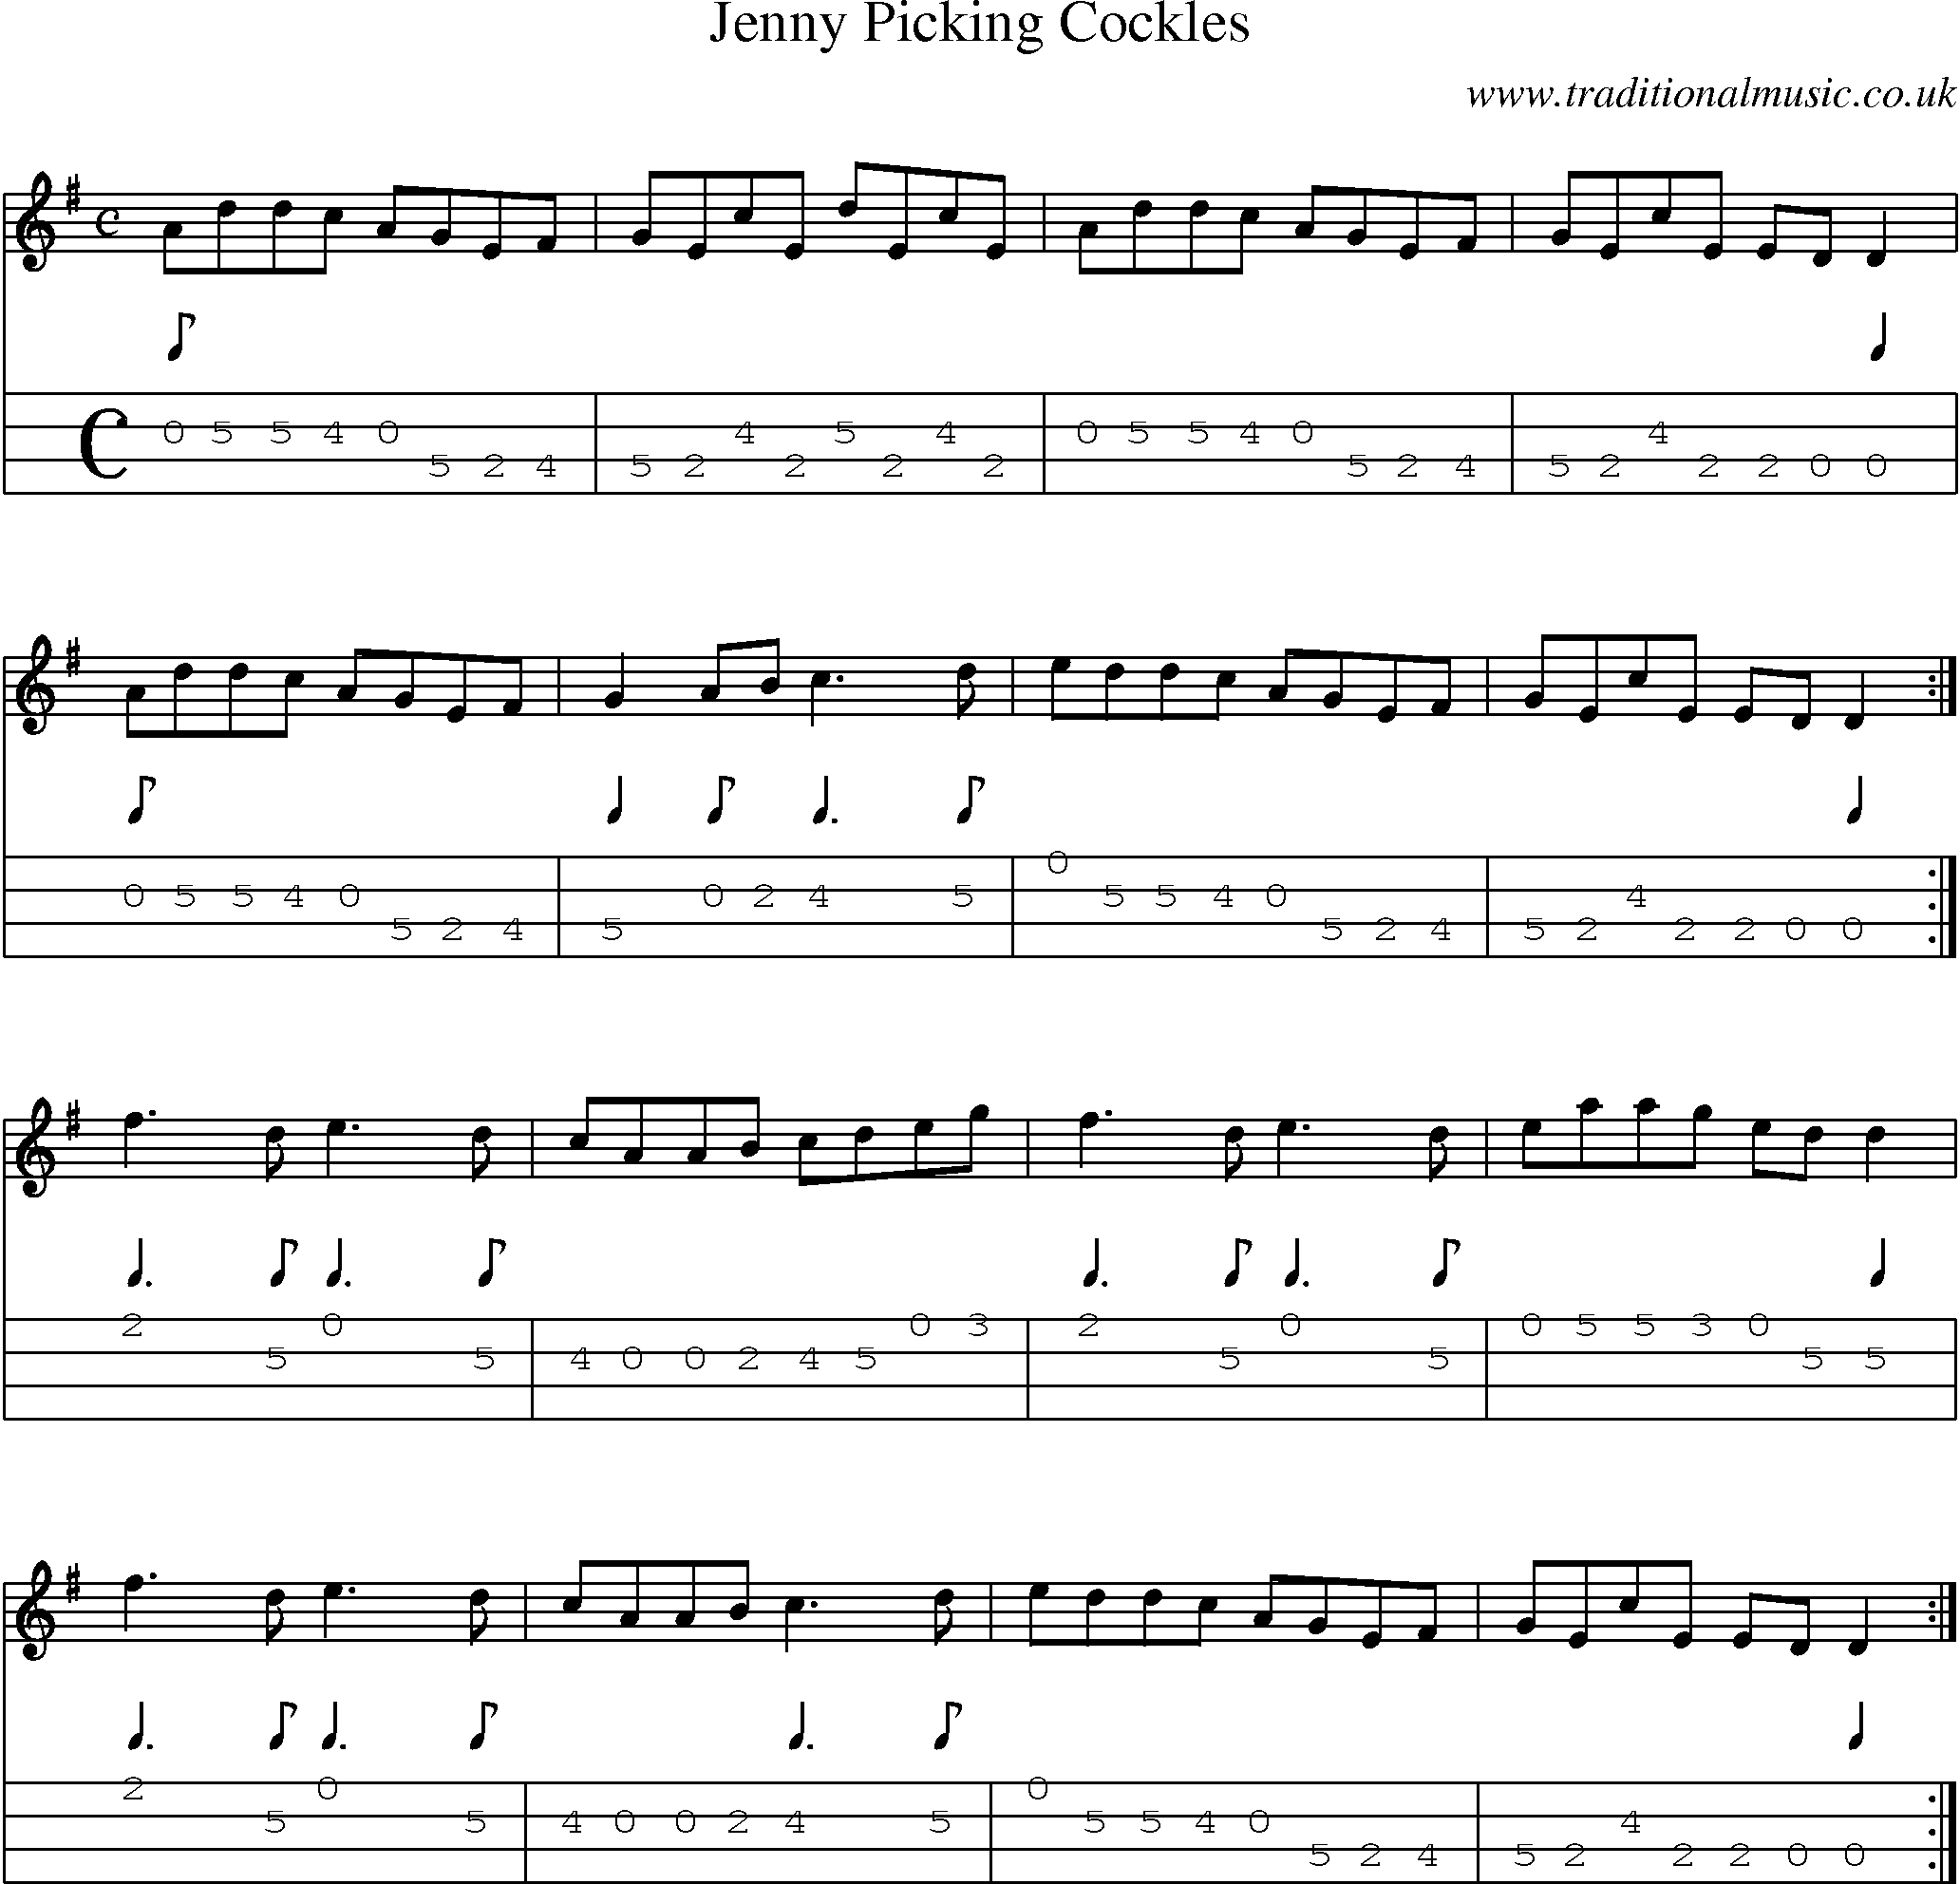 Music Score and Mandolin Tabs for Jenny Picking Cockles